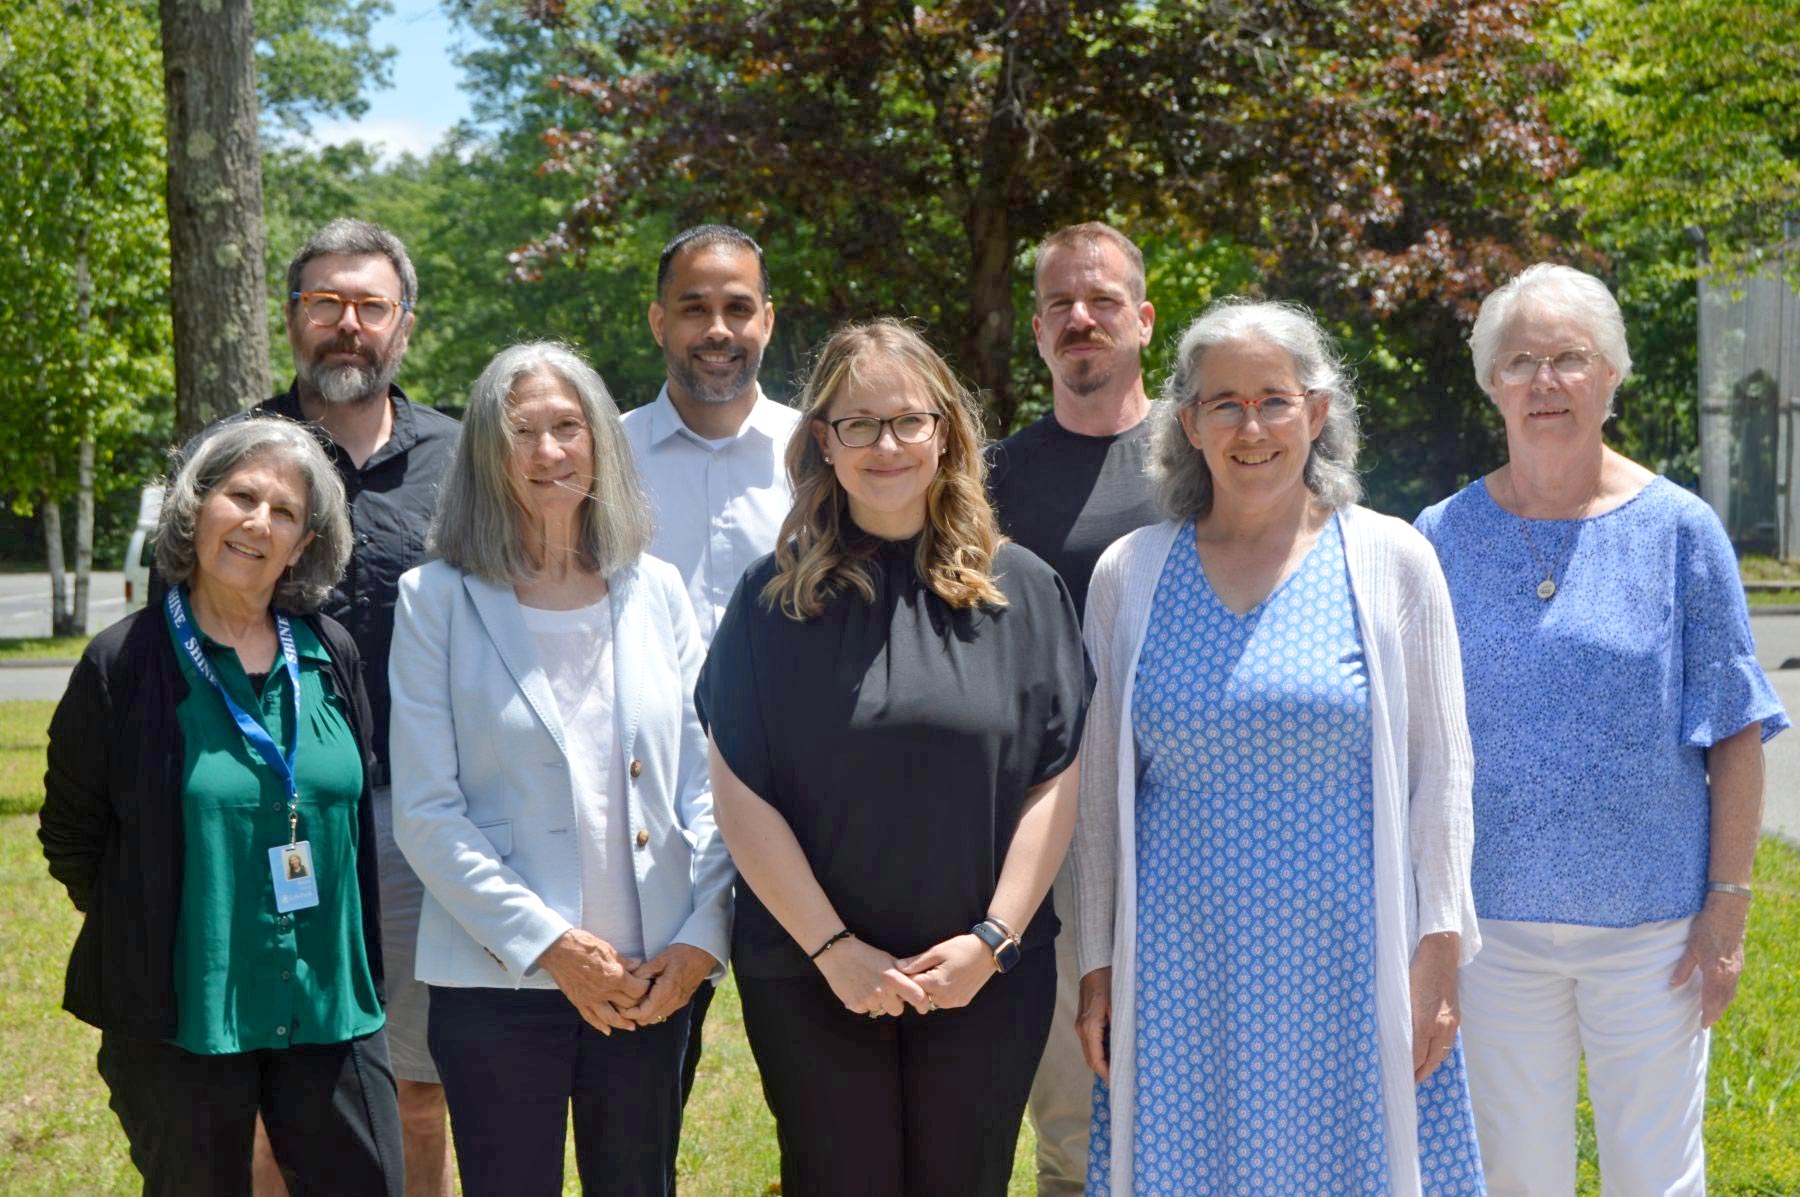 L. to R., front row: SHINE Graduates Marla Zlotnik, Martha Jamison, Kate DiSanto, Meg Ryan, Priscilla Phelps; L. to R., back row: SHINE Graduates Chad Hunter, Walter Valentin, Teddy Doucette. (Unable to attend: SHINE Graduate Ashley C. Fraga, CDP, Outreach Coordinator at the Easthampton Council on Aging and Enrichment Center.)